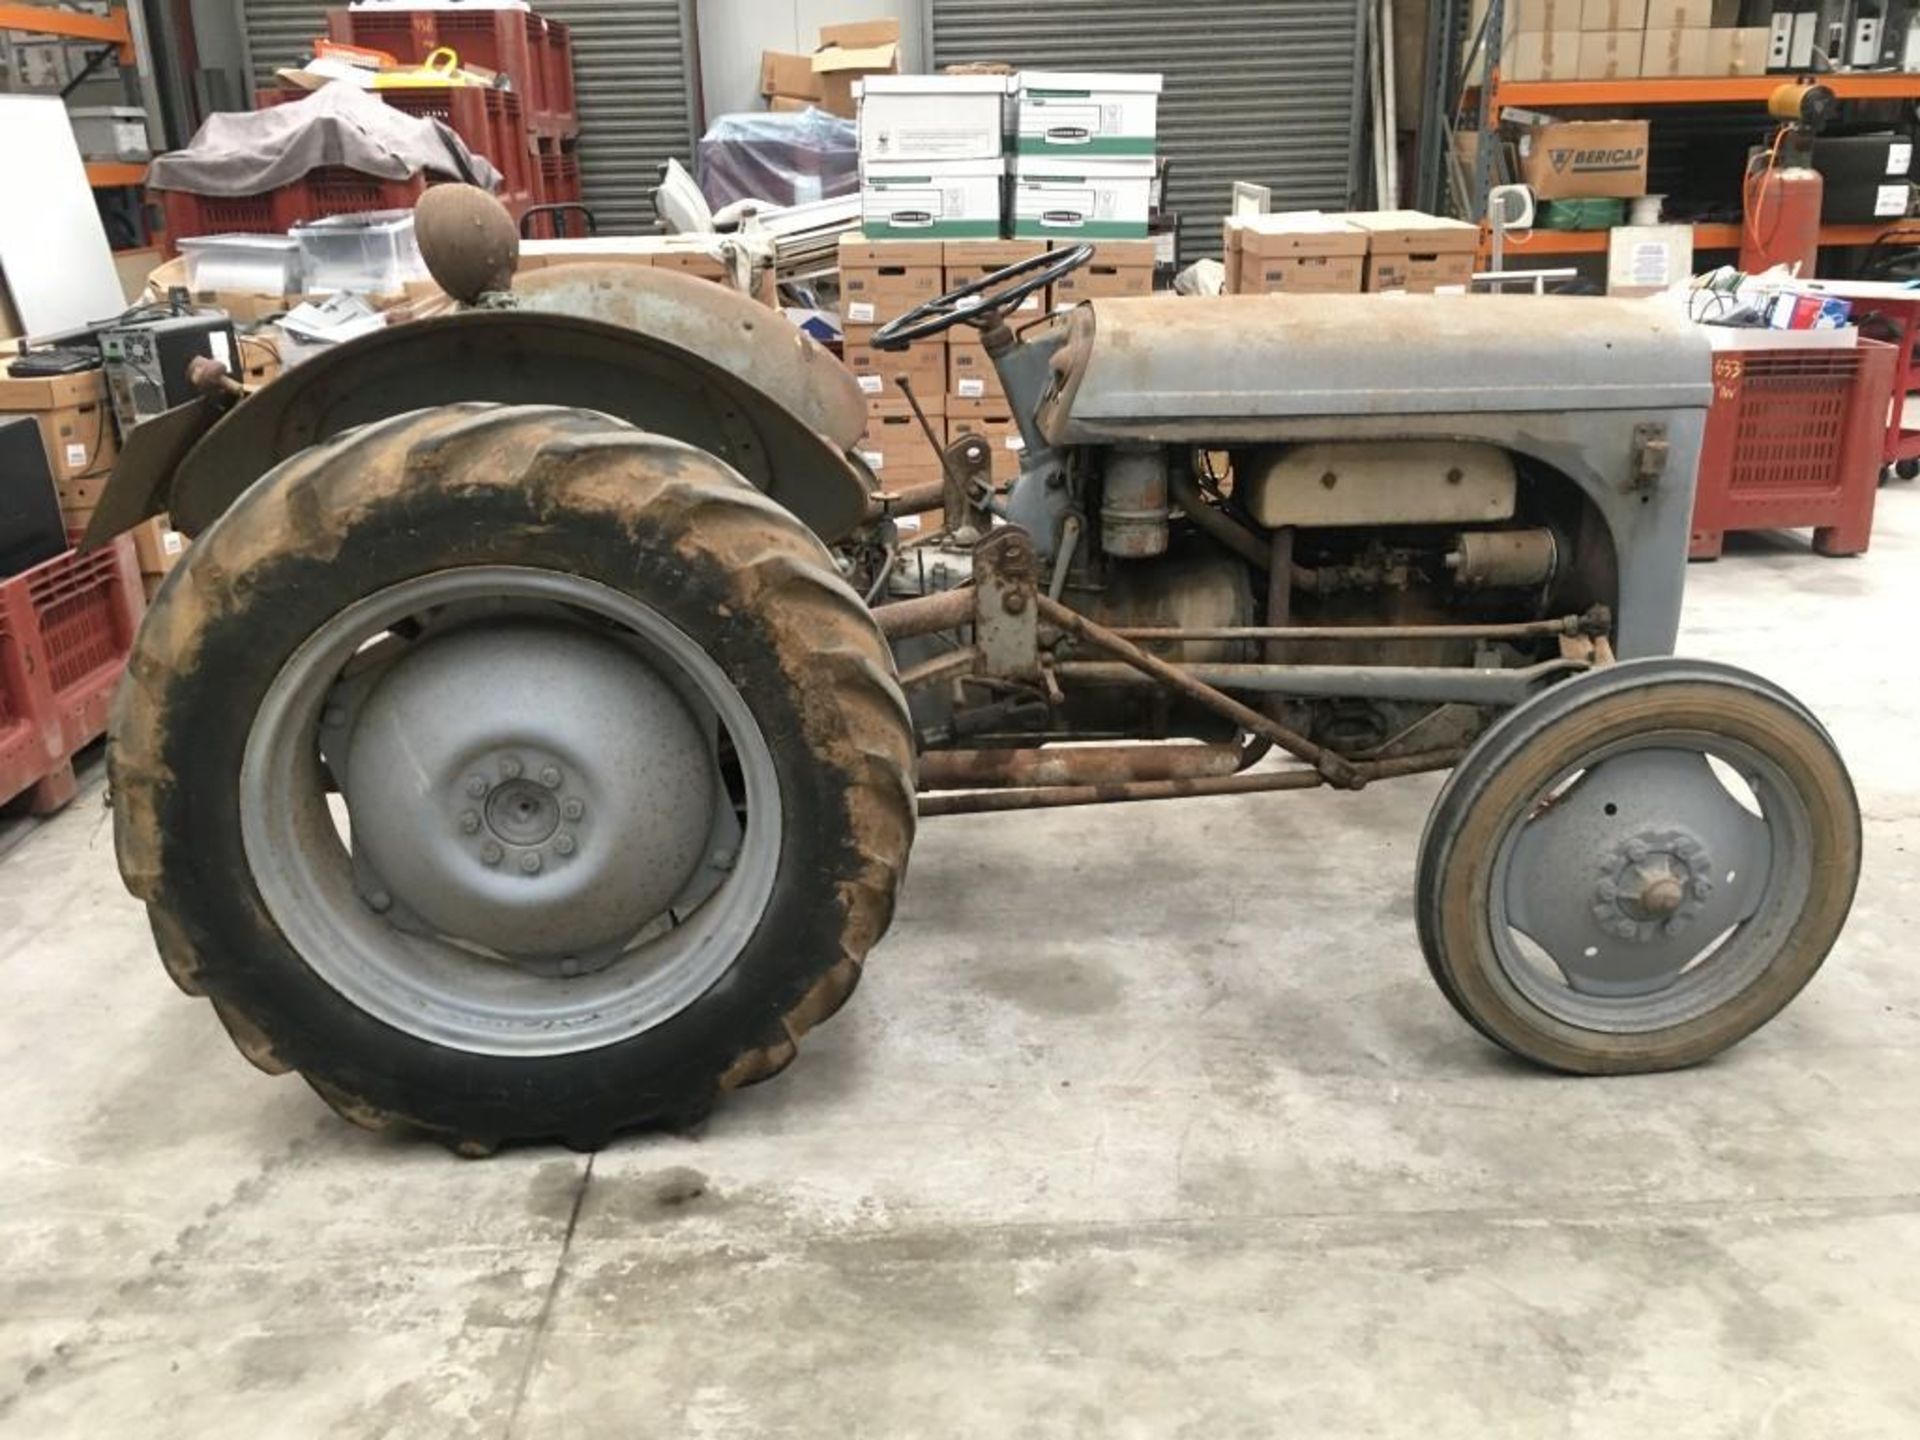 Ferguson TE-20, Petrol Parrafin, c/w Hydraulic Front Loader & Dung Fork (next to auctioneers box), N - Image 12 of 15